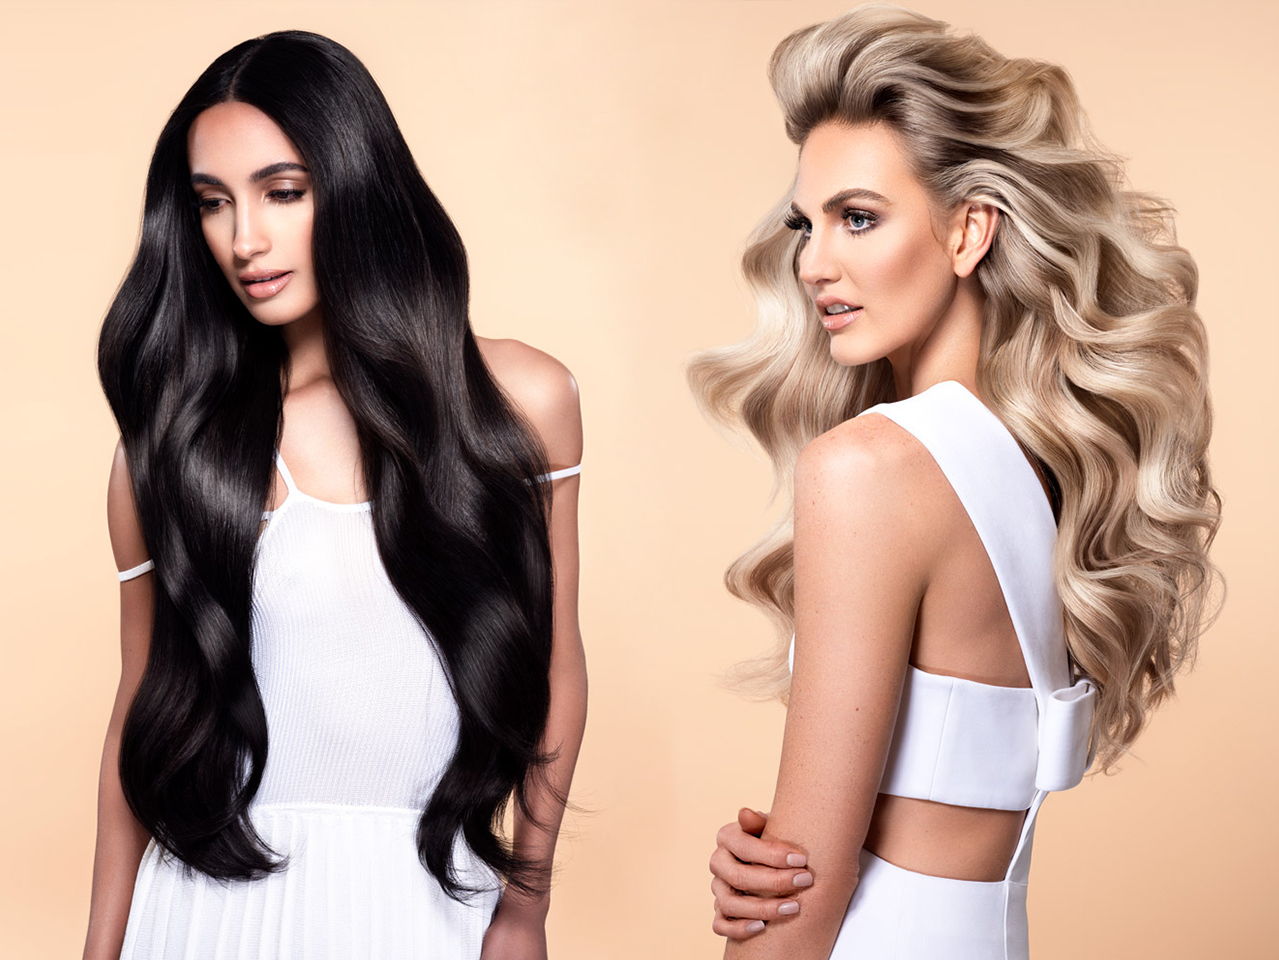 most seamless hair extensions